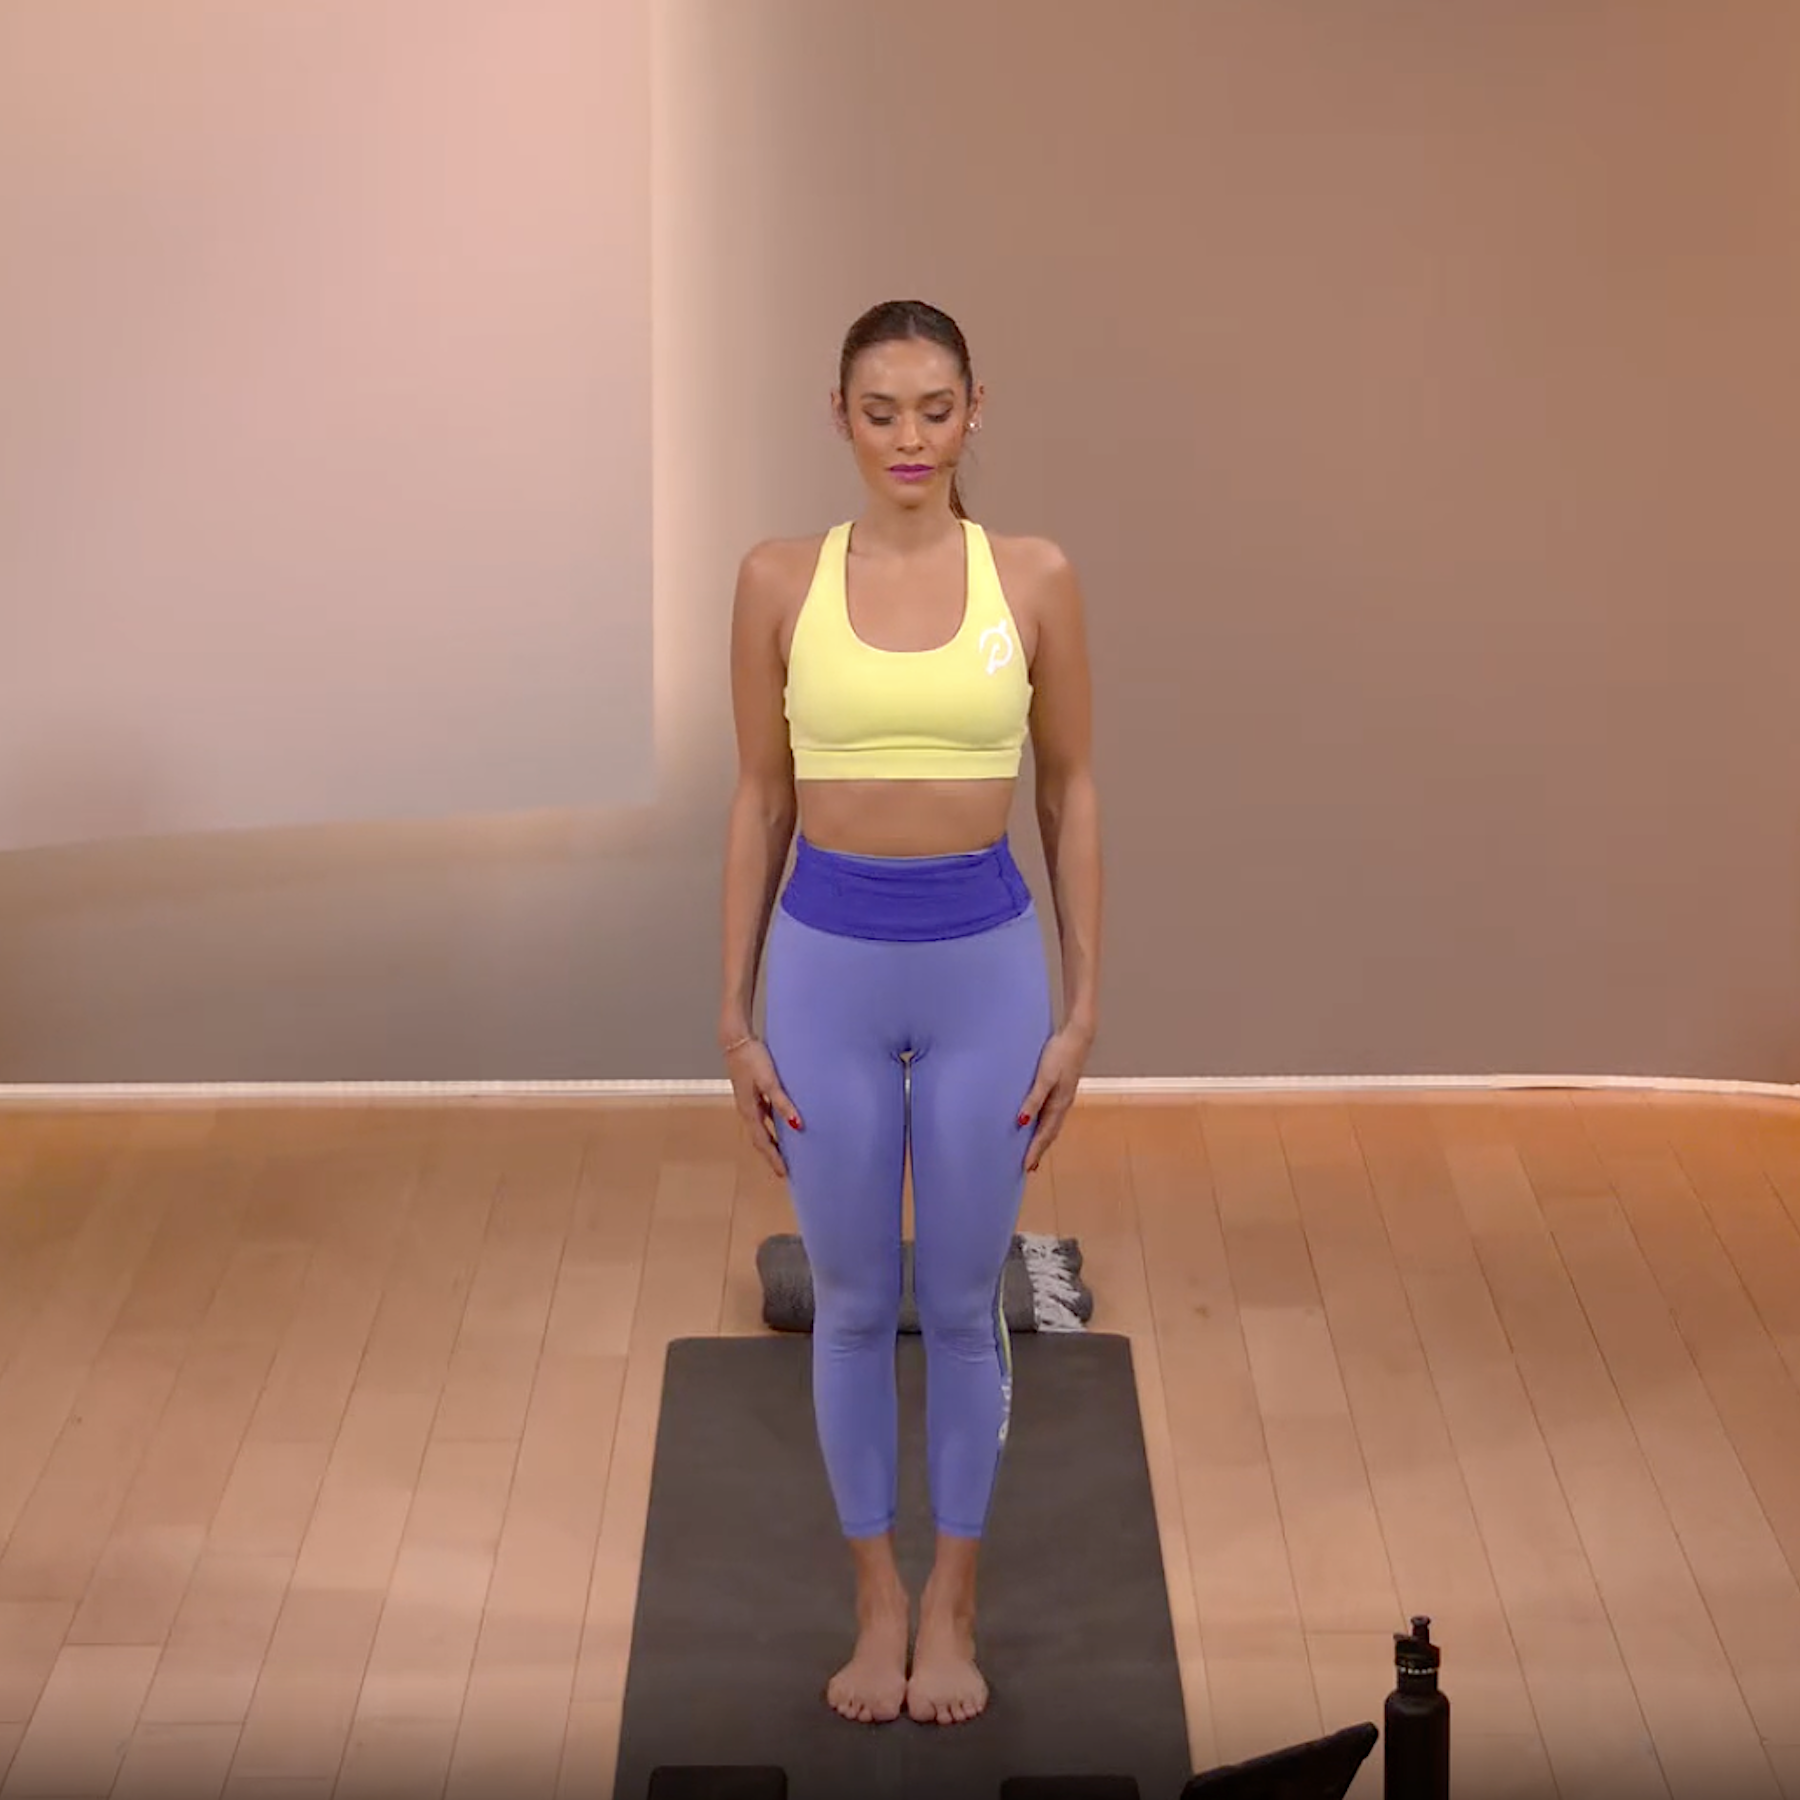 YOGA FOR BURNOUT  Women's Yoga Poses for Emotional Release 